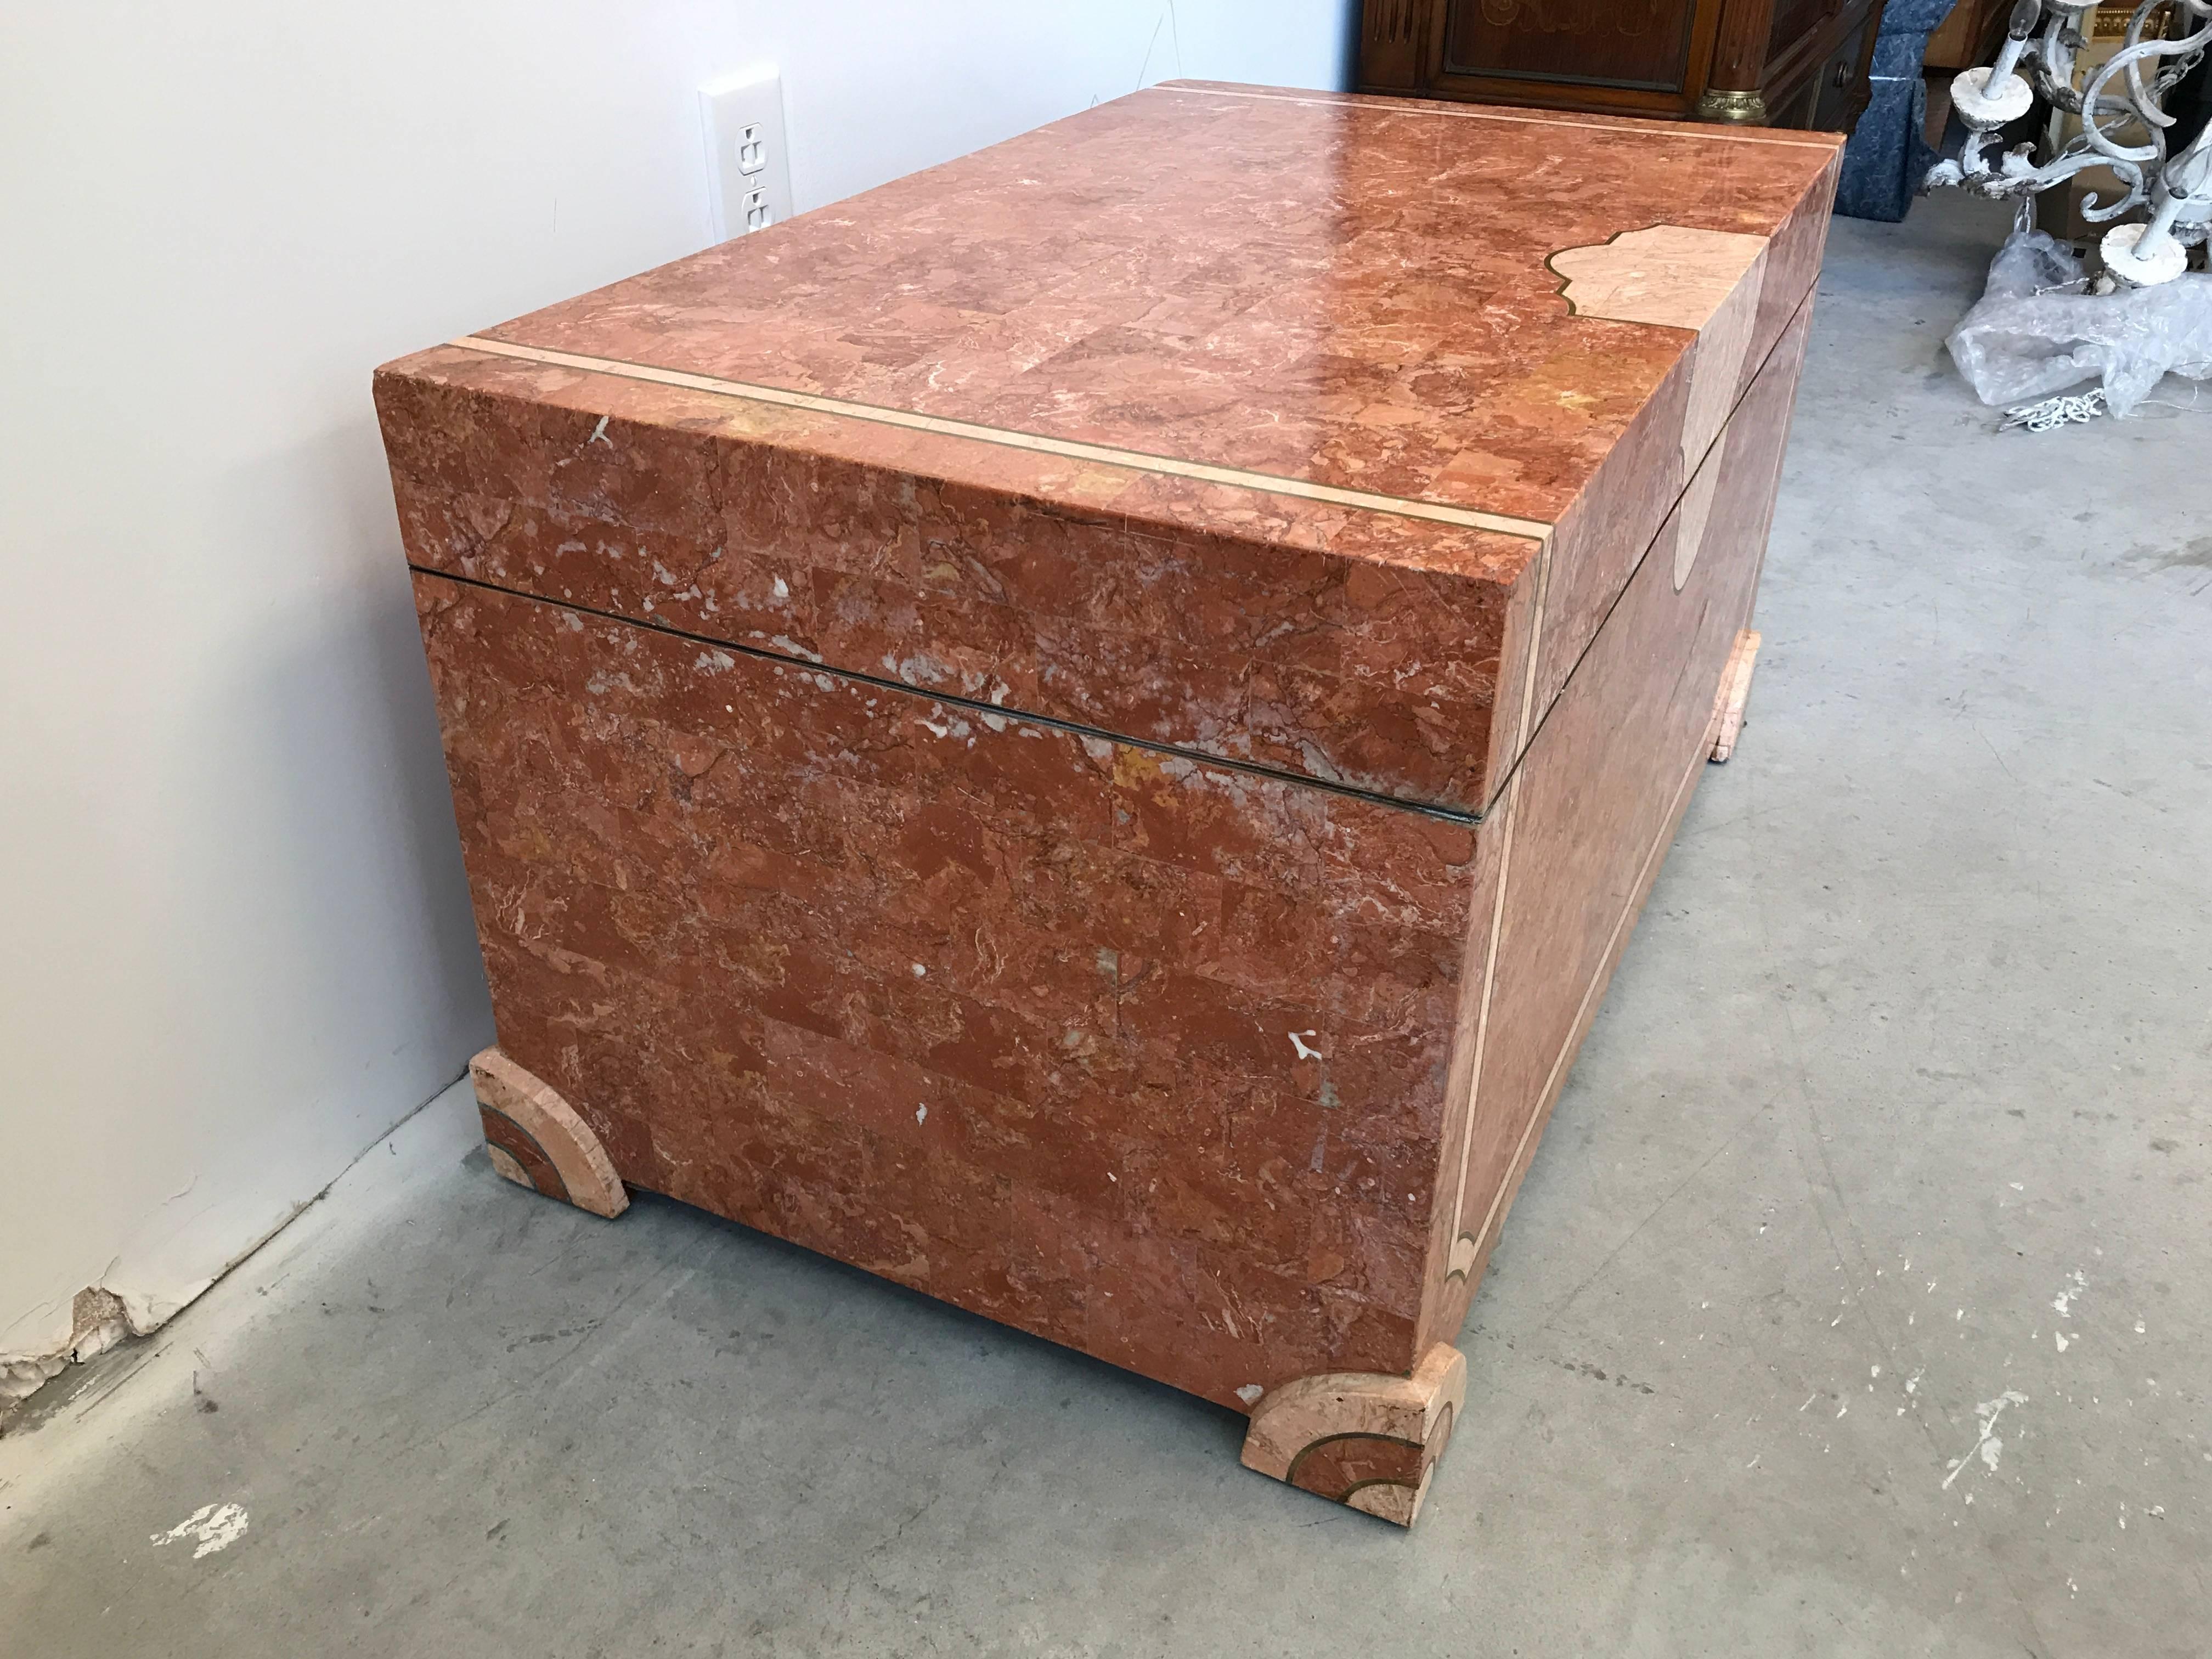 Hollywood Regency Robert Marcius for Casa Bique Tesselated Stone Trunk Coffee Table, 1980s For Sale